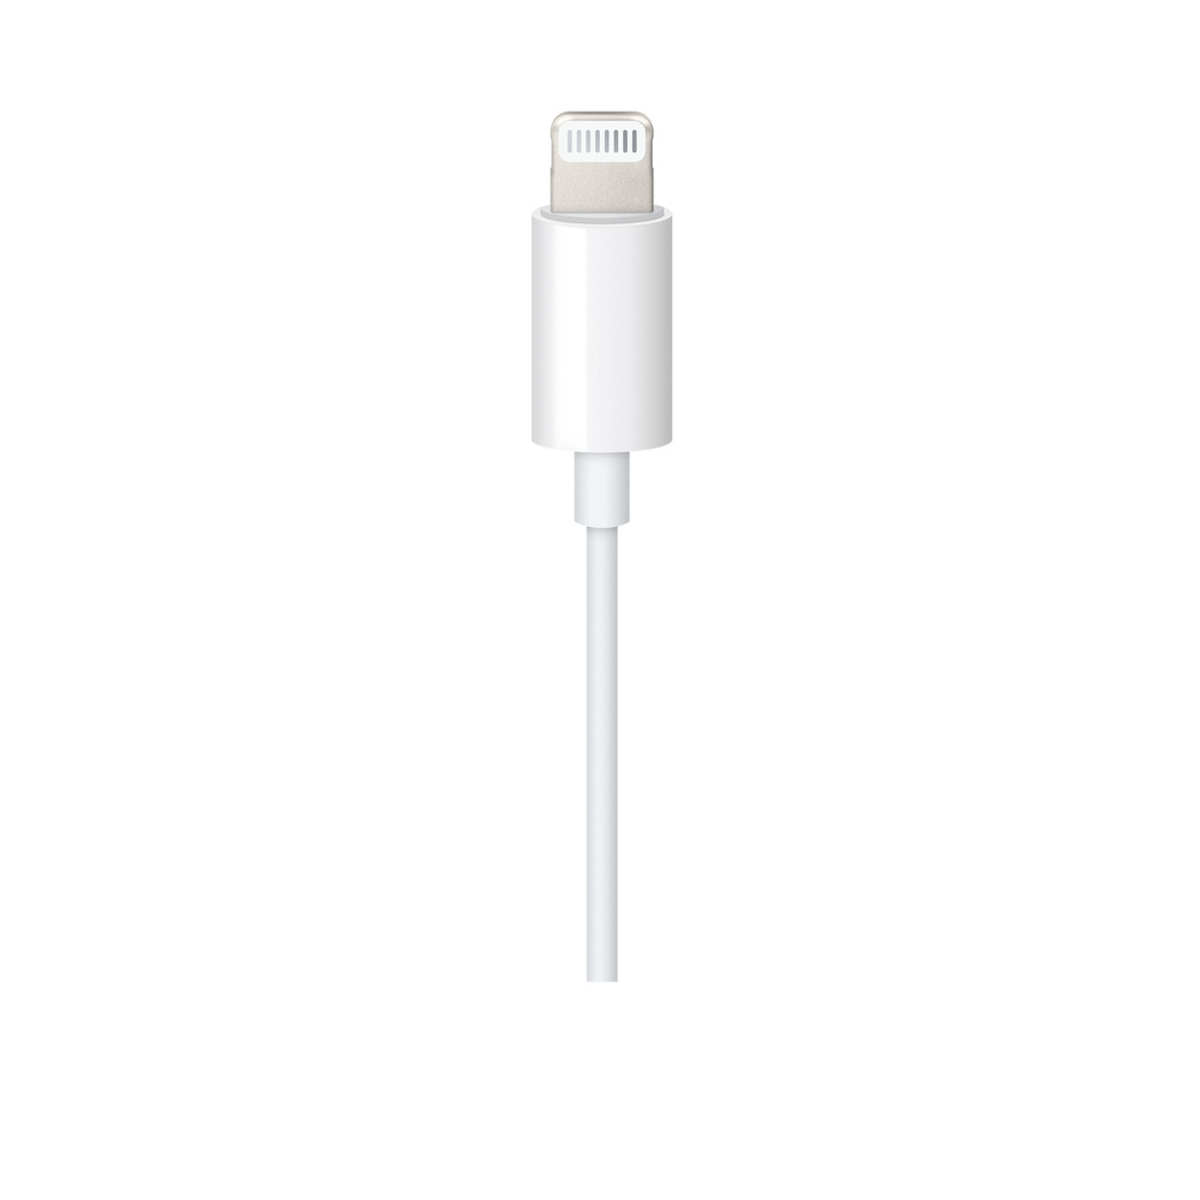 Apple Lightning to 3.5 mm Audio Cable (1.2m) White MXK22ZE/A